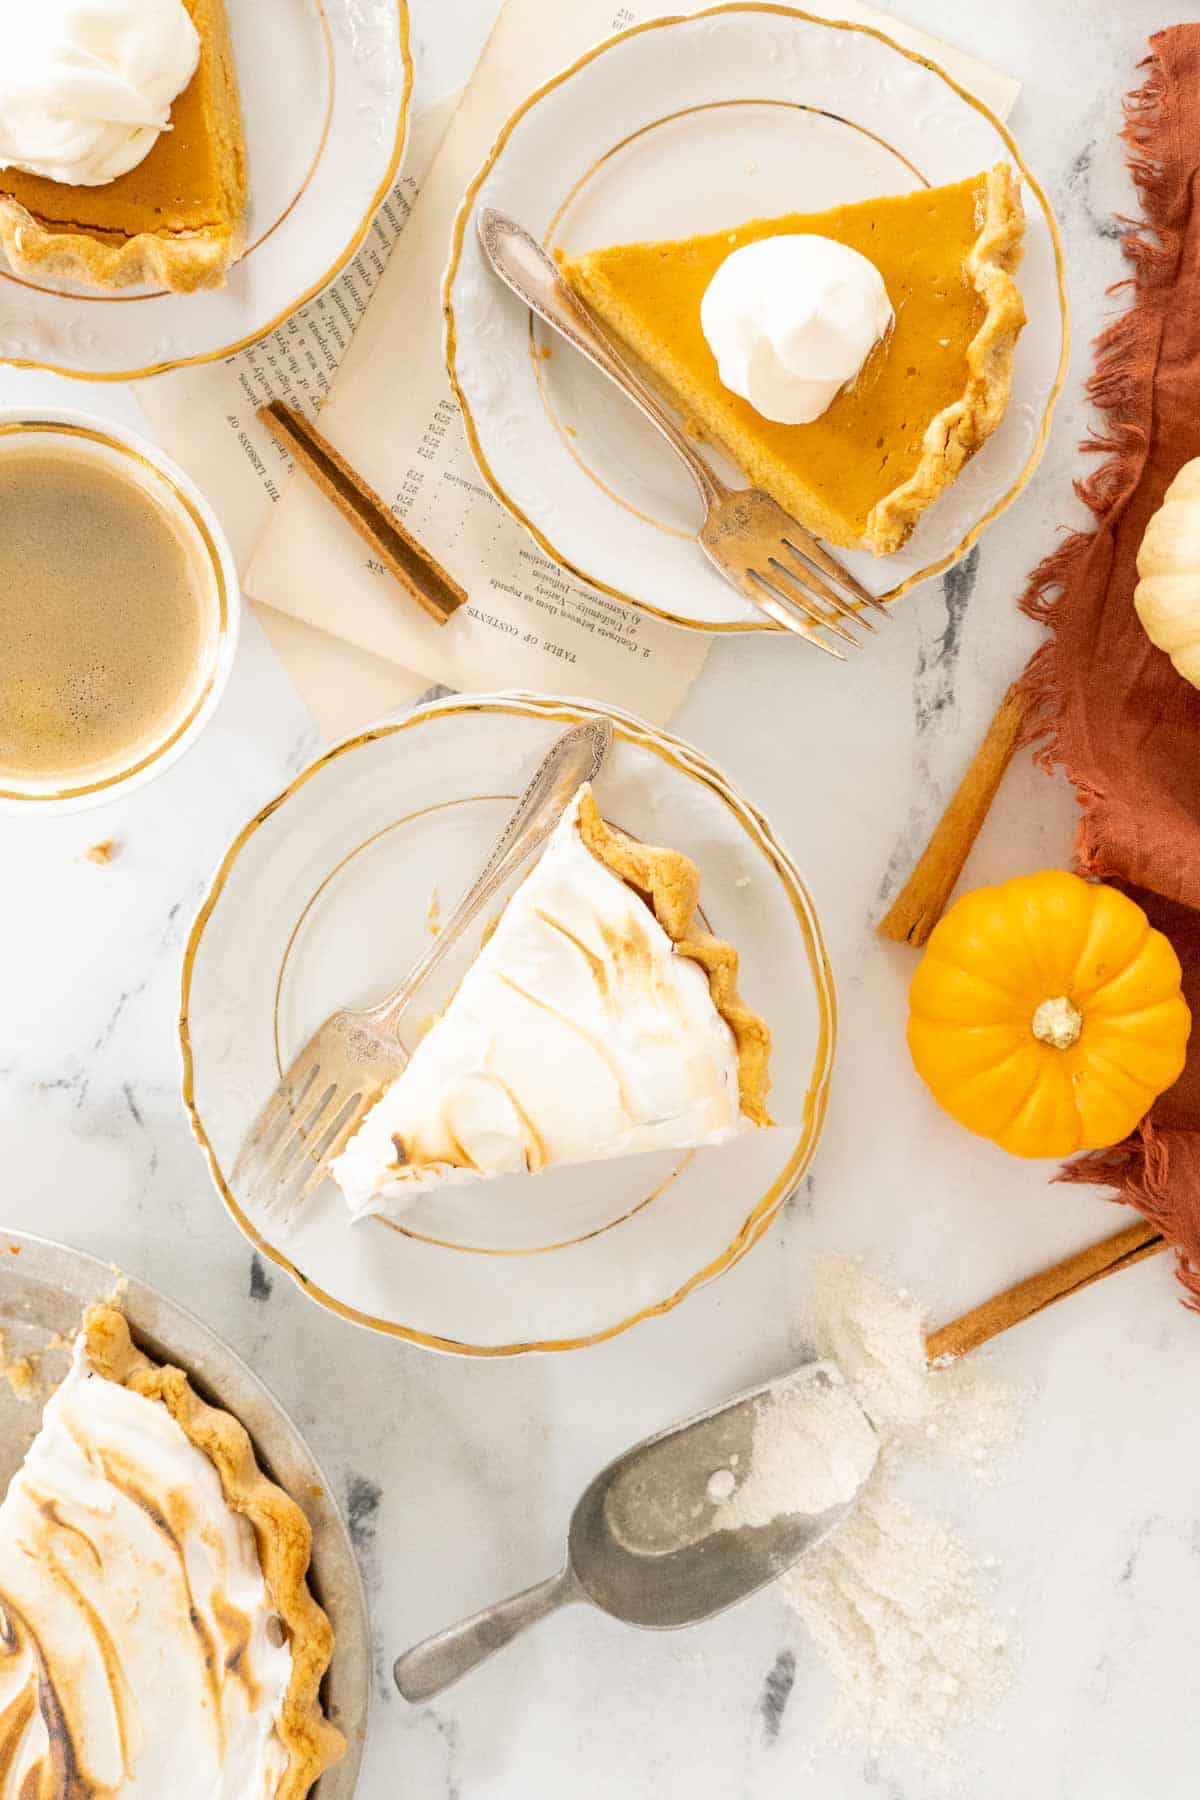 Two versions of the sweet potato pie, one plain and one with marshmallow topping.